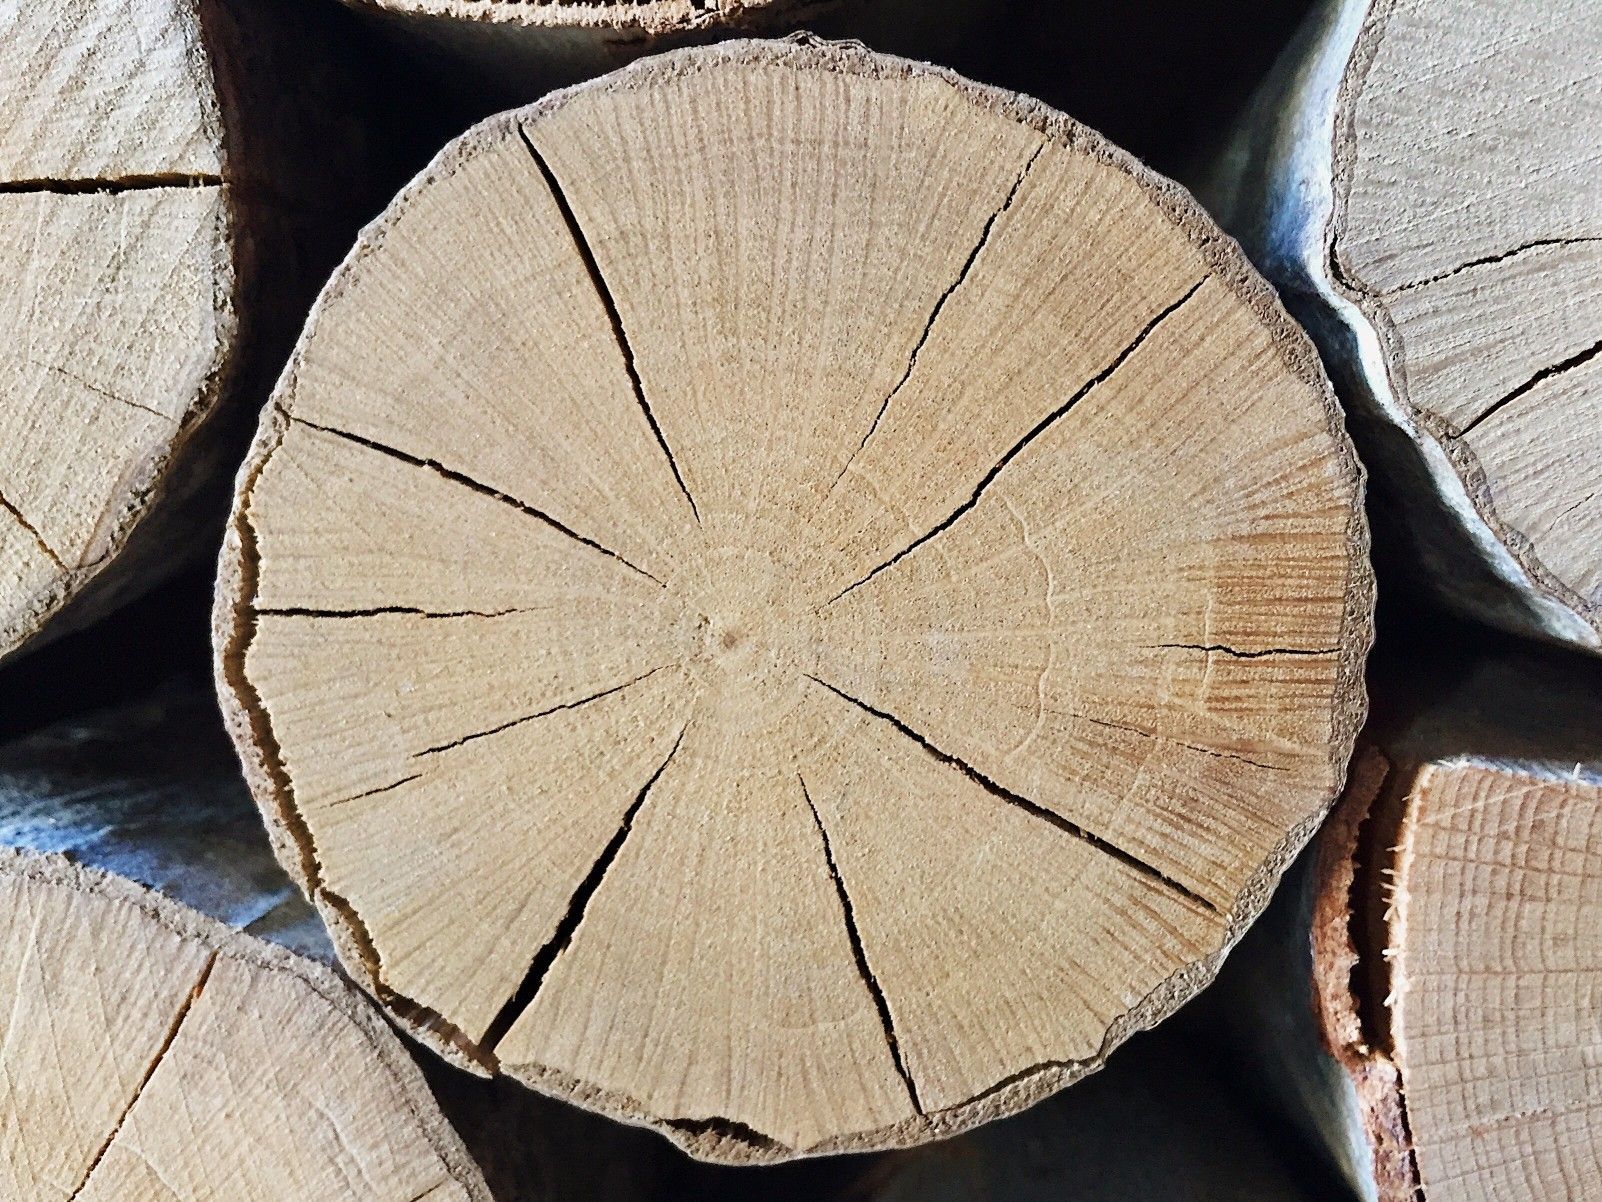 seasoned wood from cut end with no bark in stacks